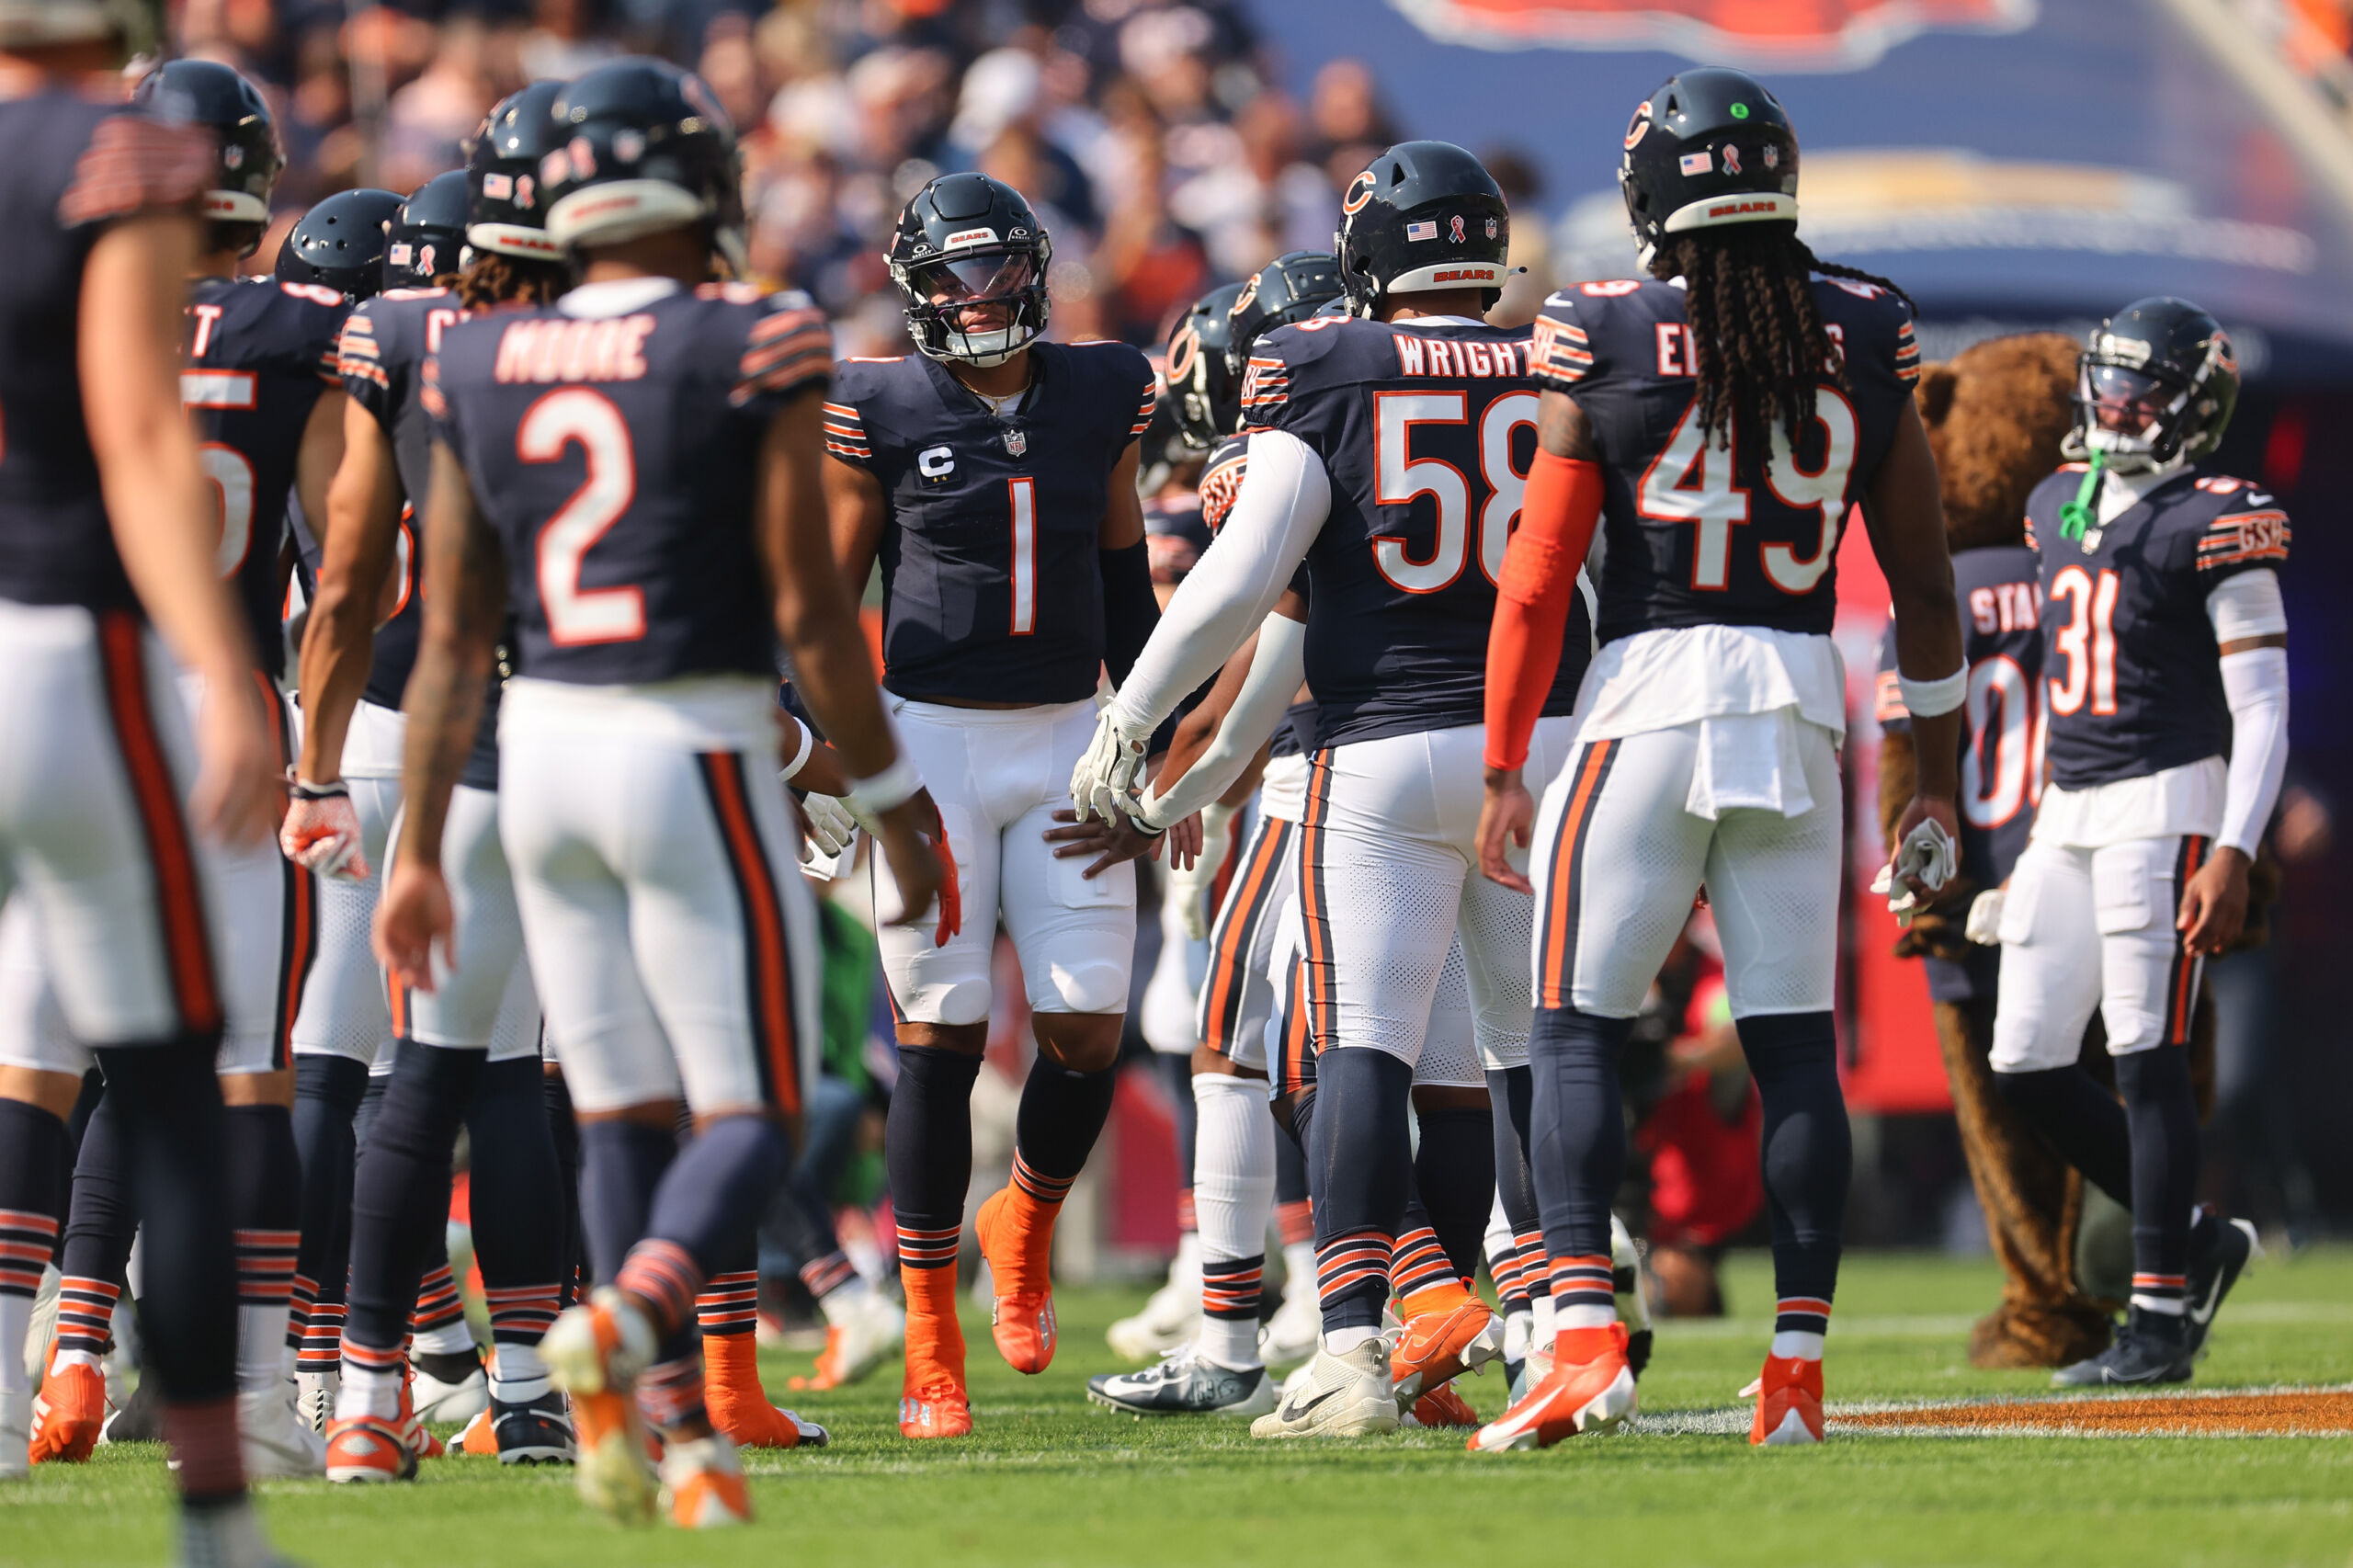 Chicago Bears: Studs and duds from Week 1 vs. Packers